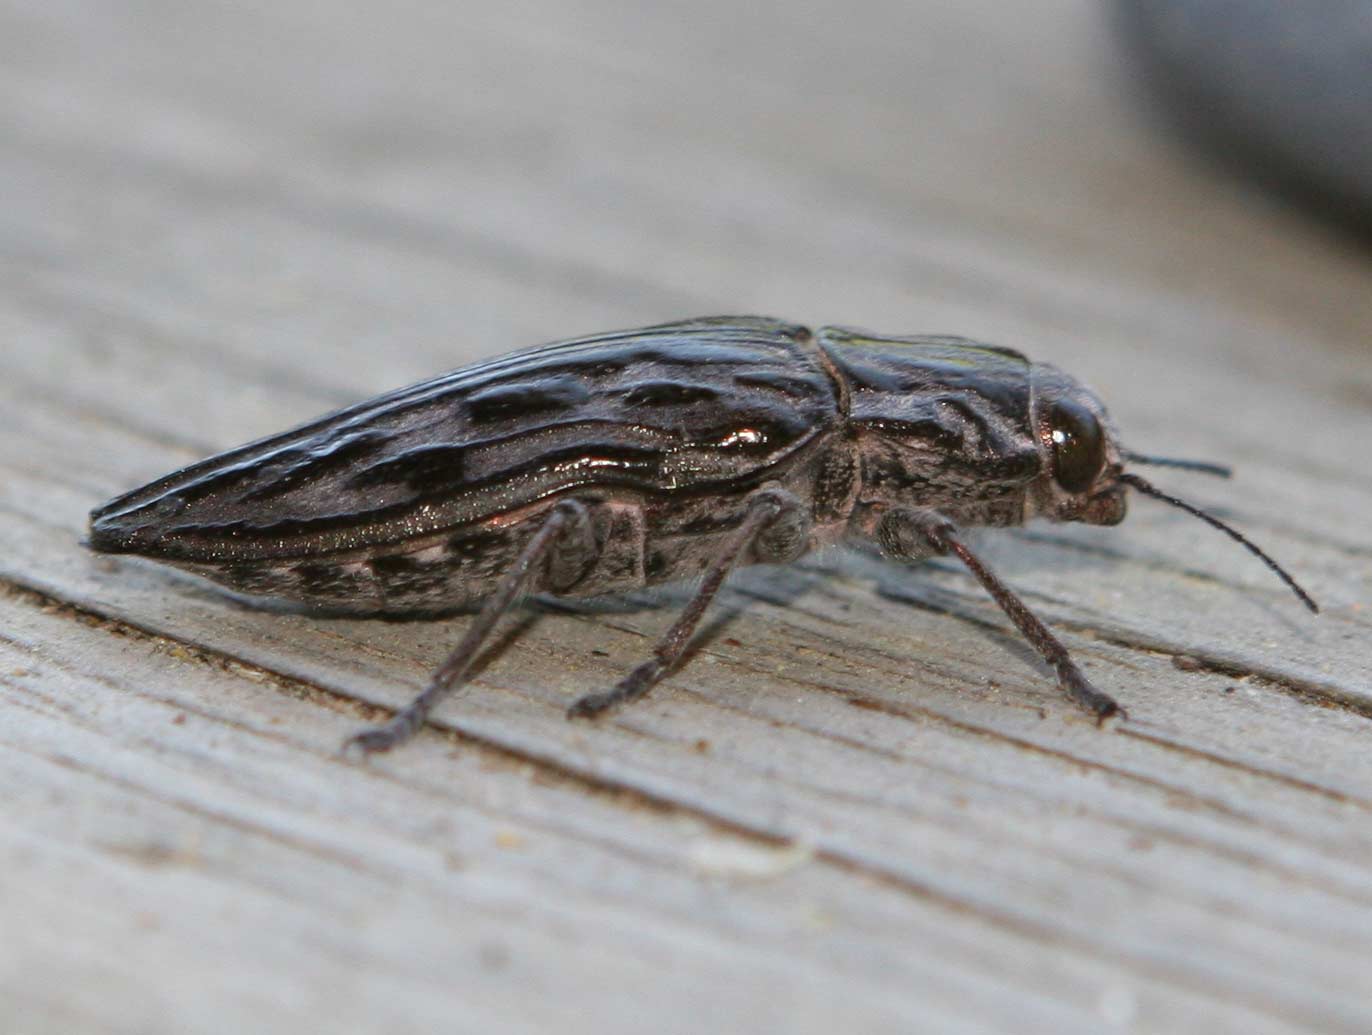 What is a pine borer beetle?